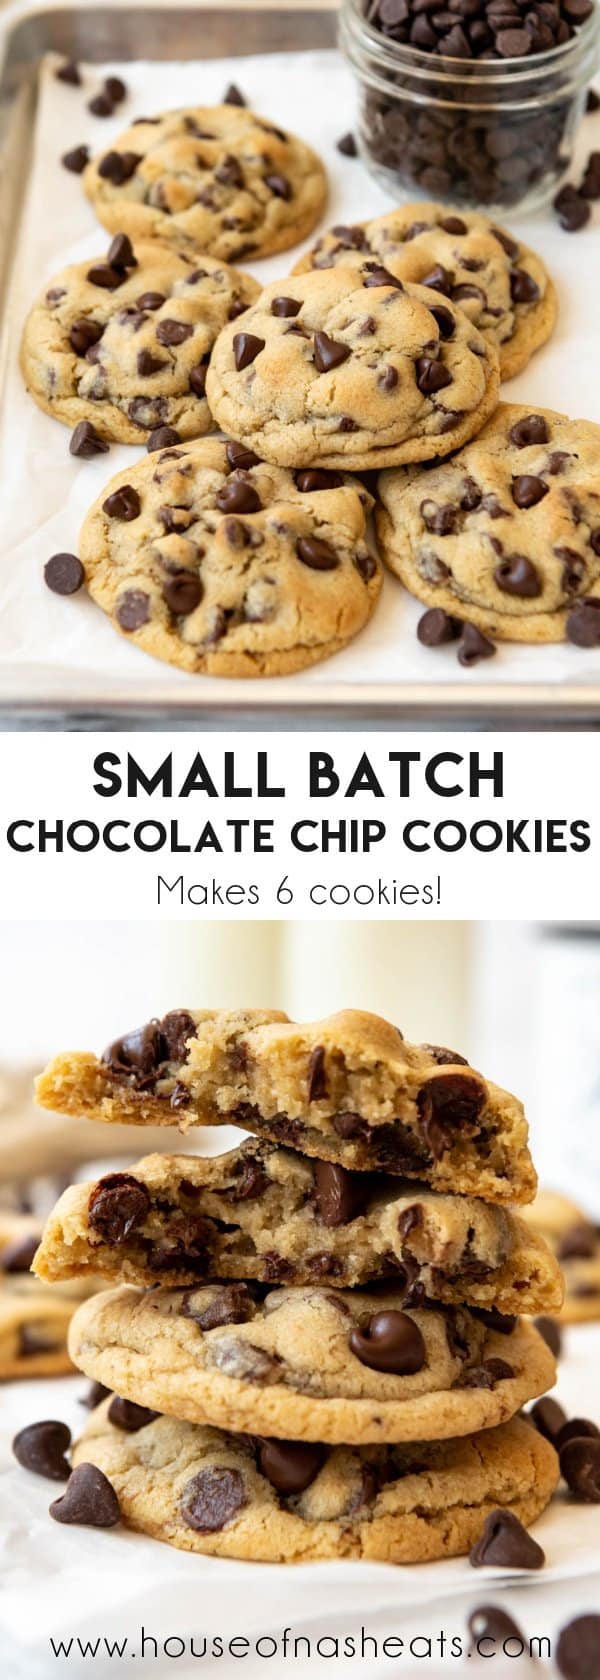 A collage of chocolate chip cookies with text overlay.